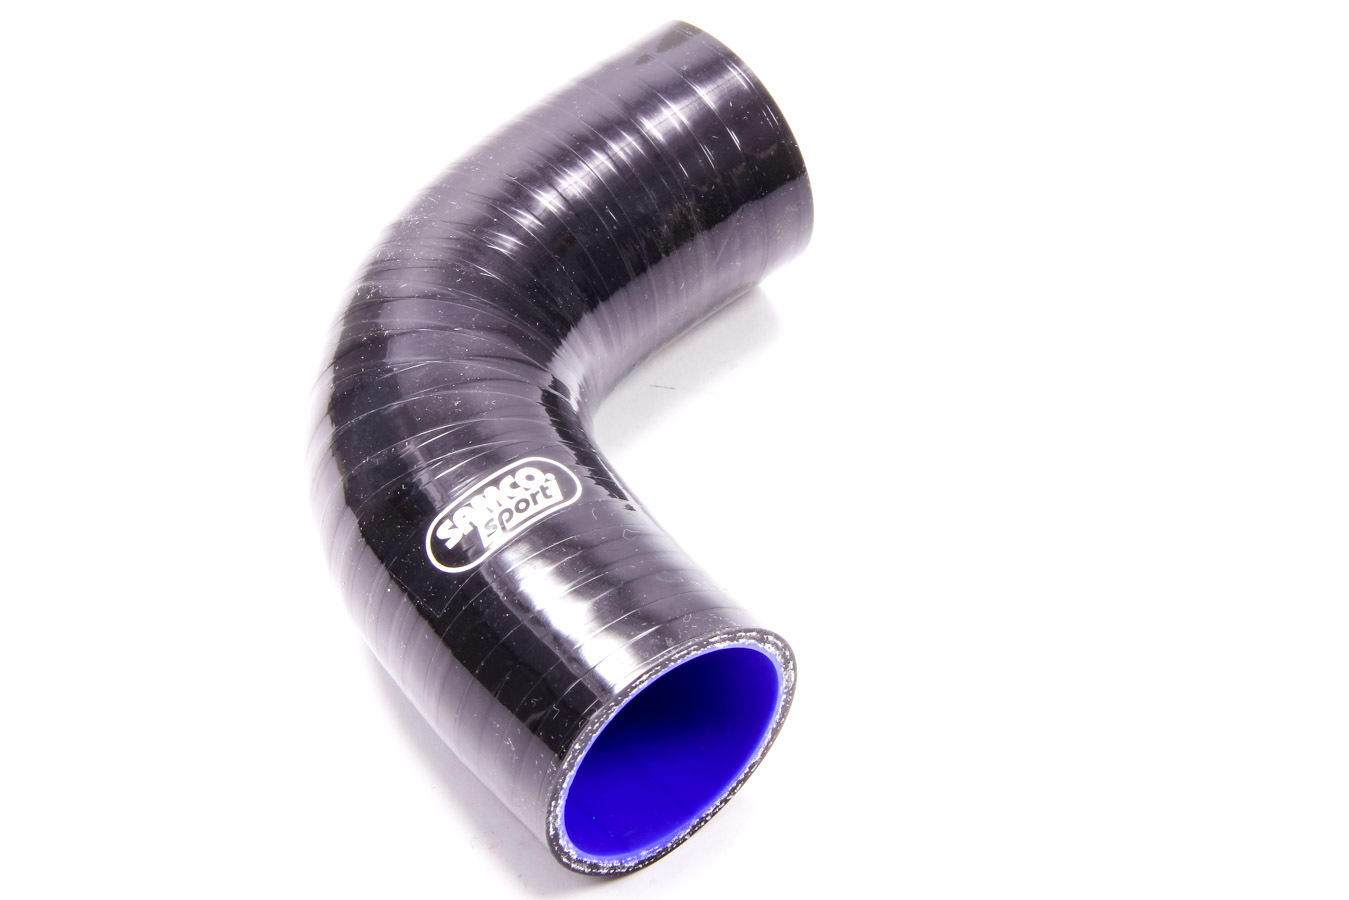 Samco Sport E9045BLACK Tubing Elbow, 90 Degree, 1-3/4 in ID, 4.0 mm Thick Wall, Silicone, Black, Each